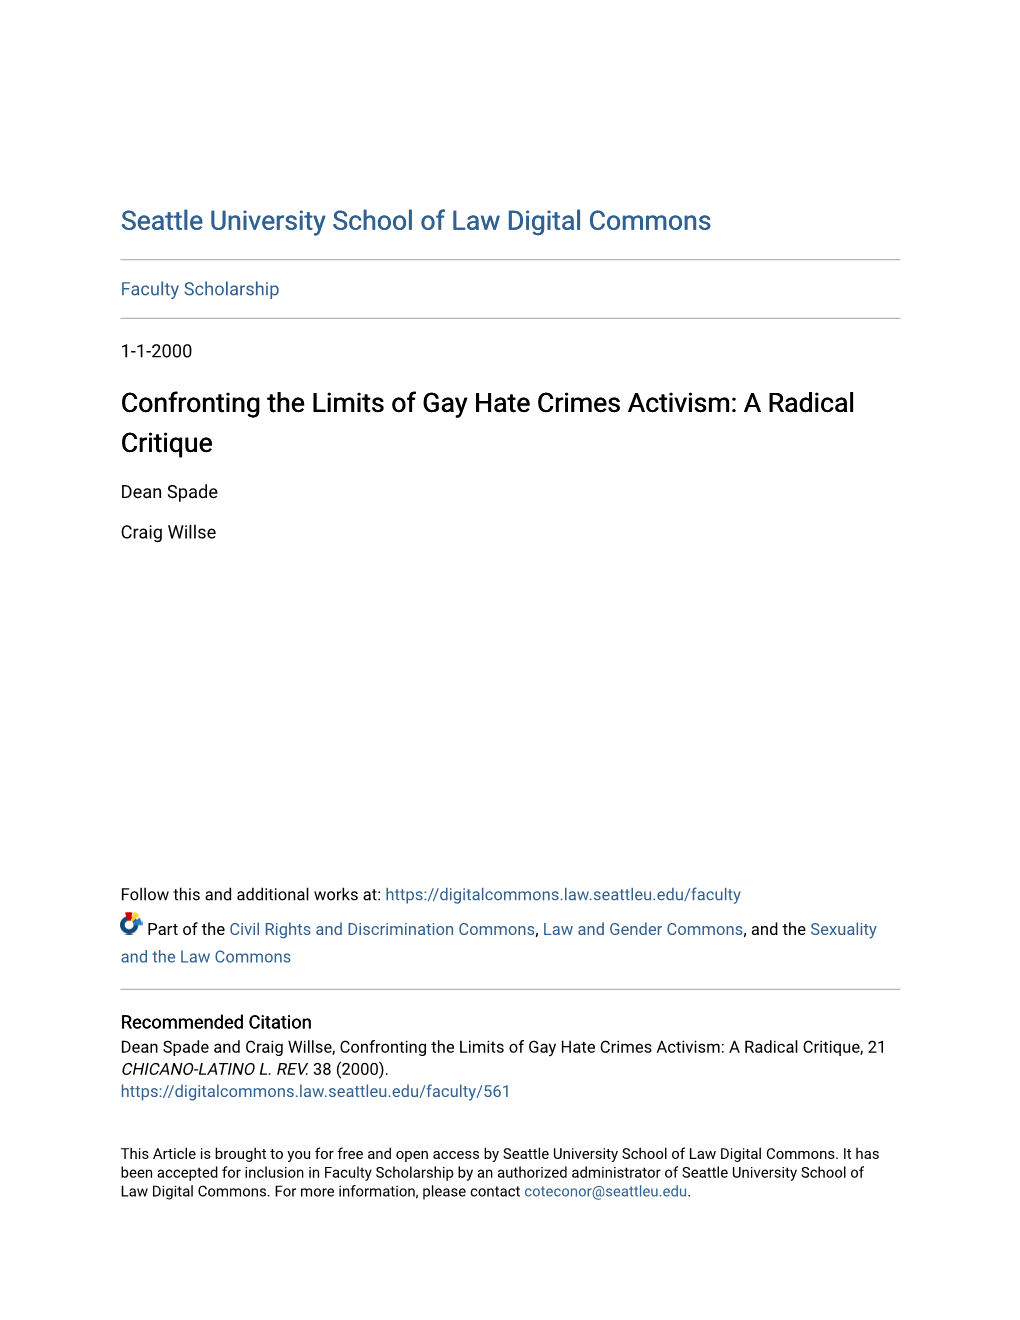 Confronting the Limits of Gay Hate Crimes Activism: a Radical Critique